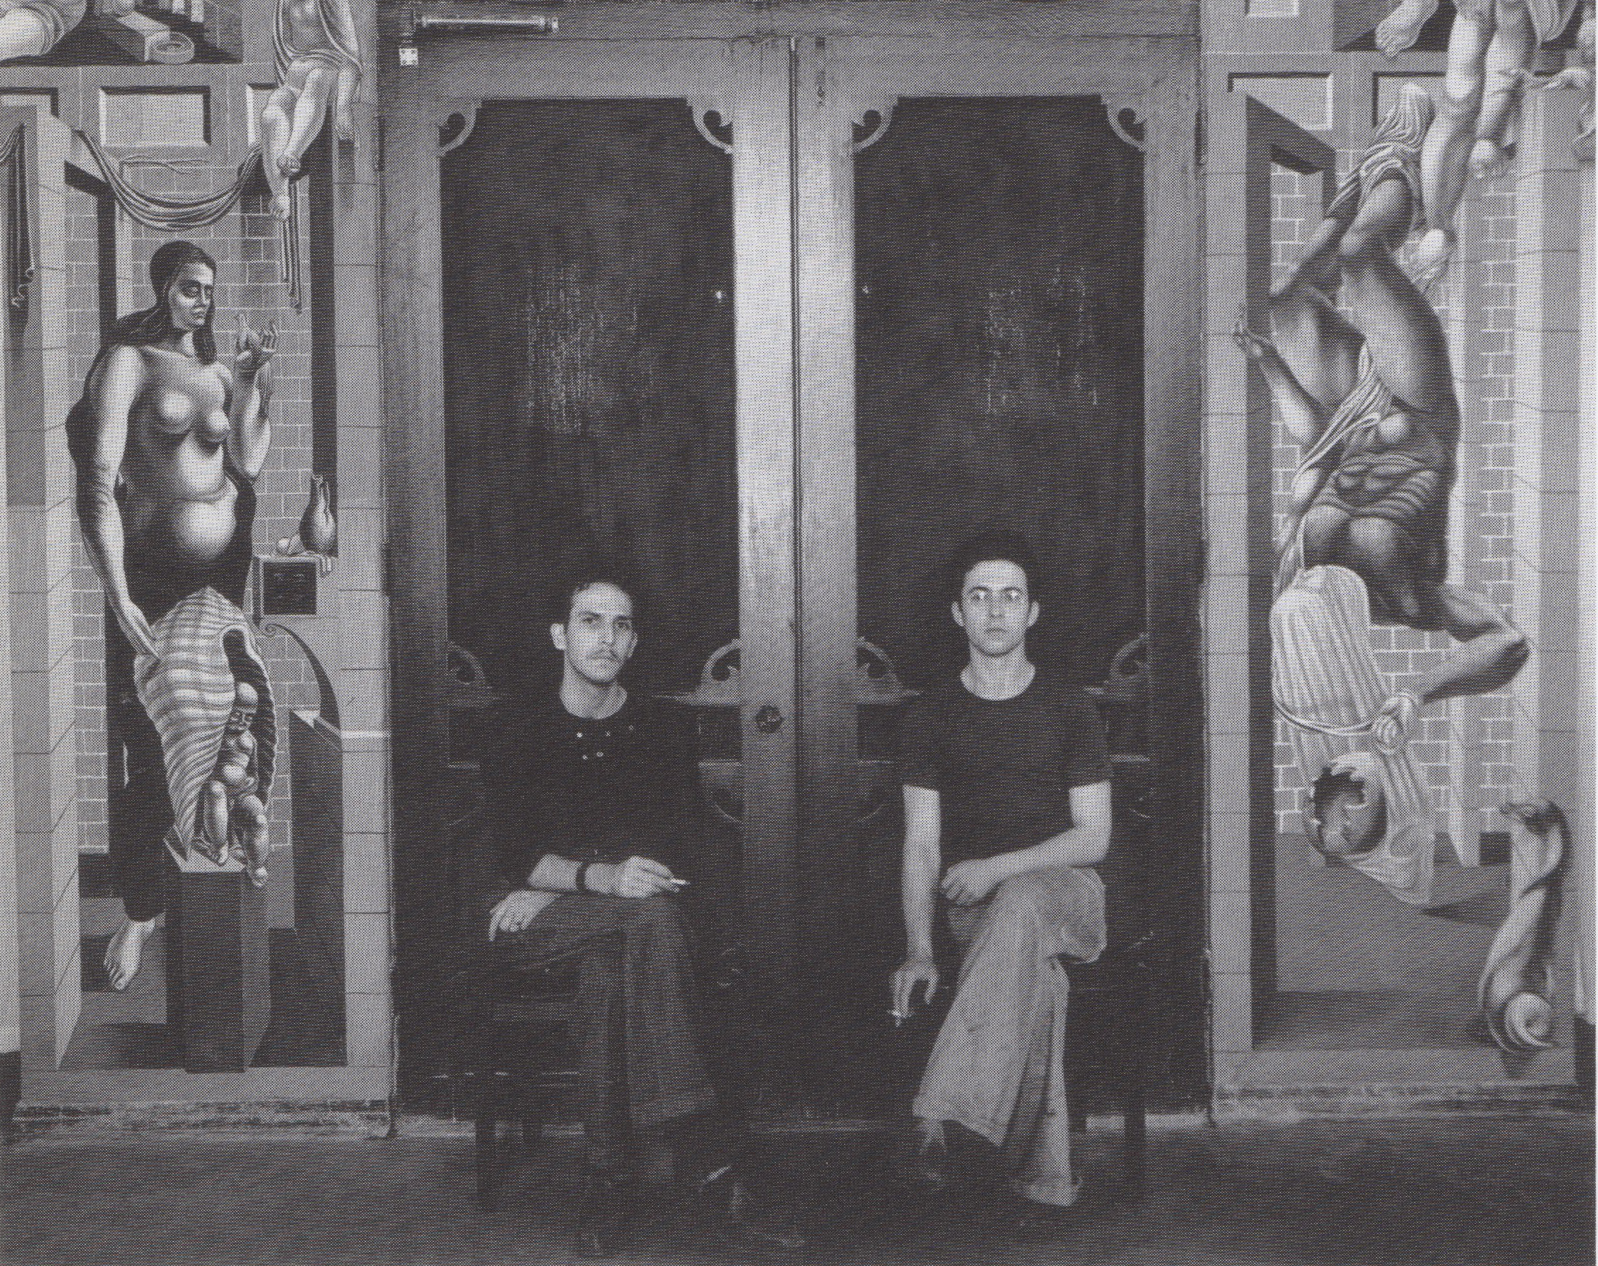 Reuben Kadish and Philip Goldstein (Guston) in 1935 at the City of Hope mural in Duarte, California 1935.